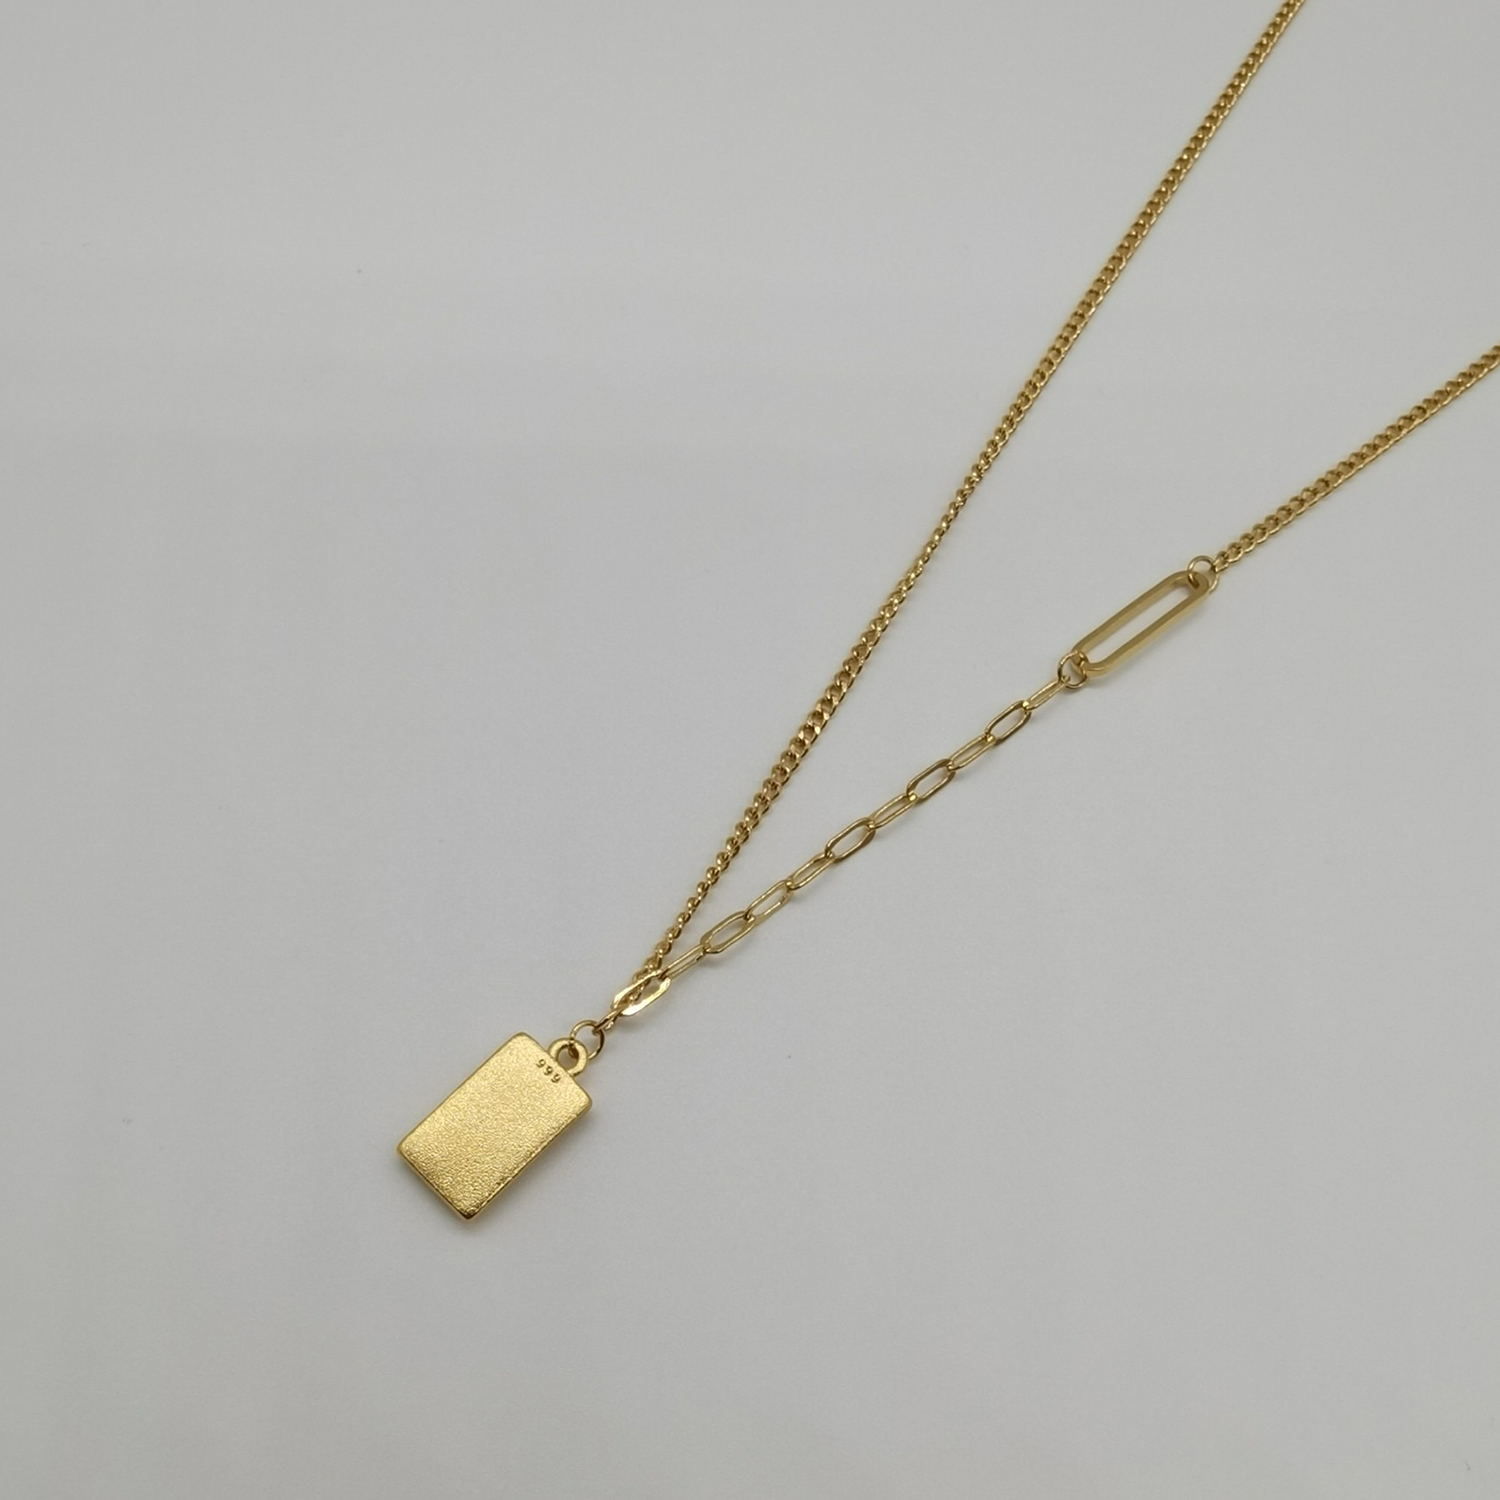 Alluvial gold vacuum electroplating 24K gold small gold bar necklace